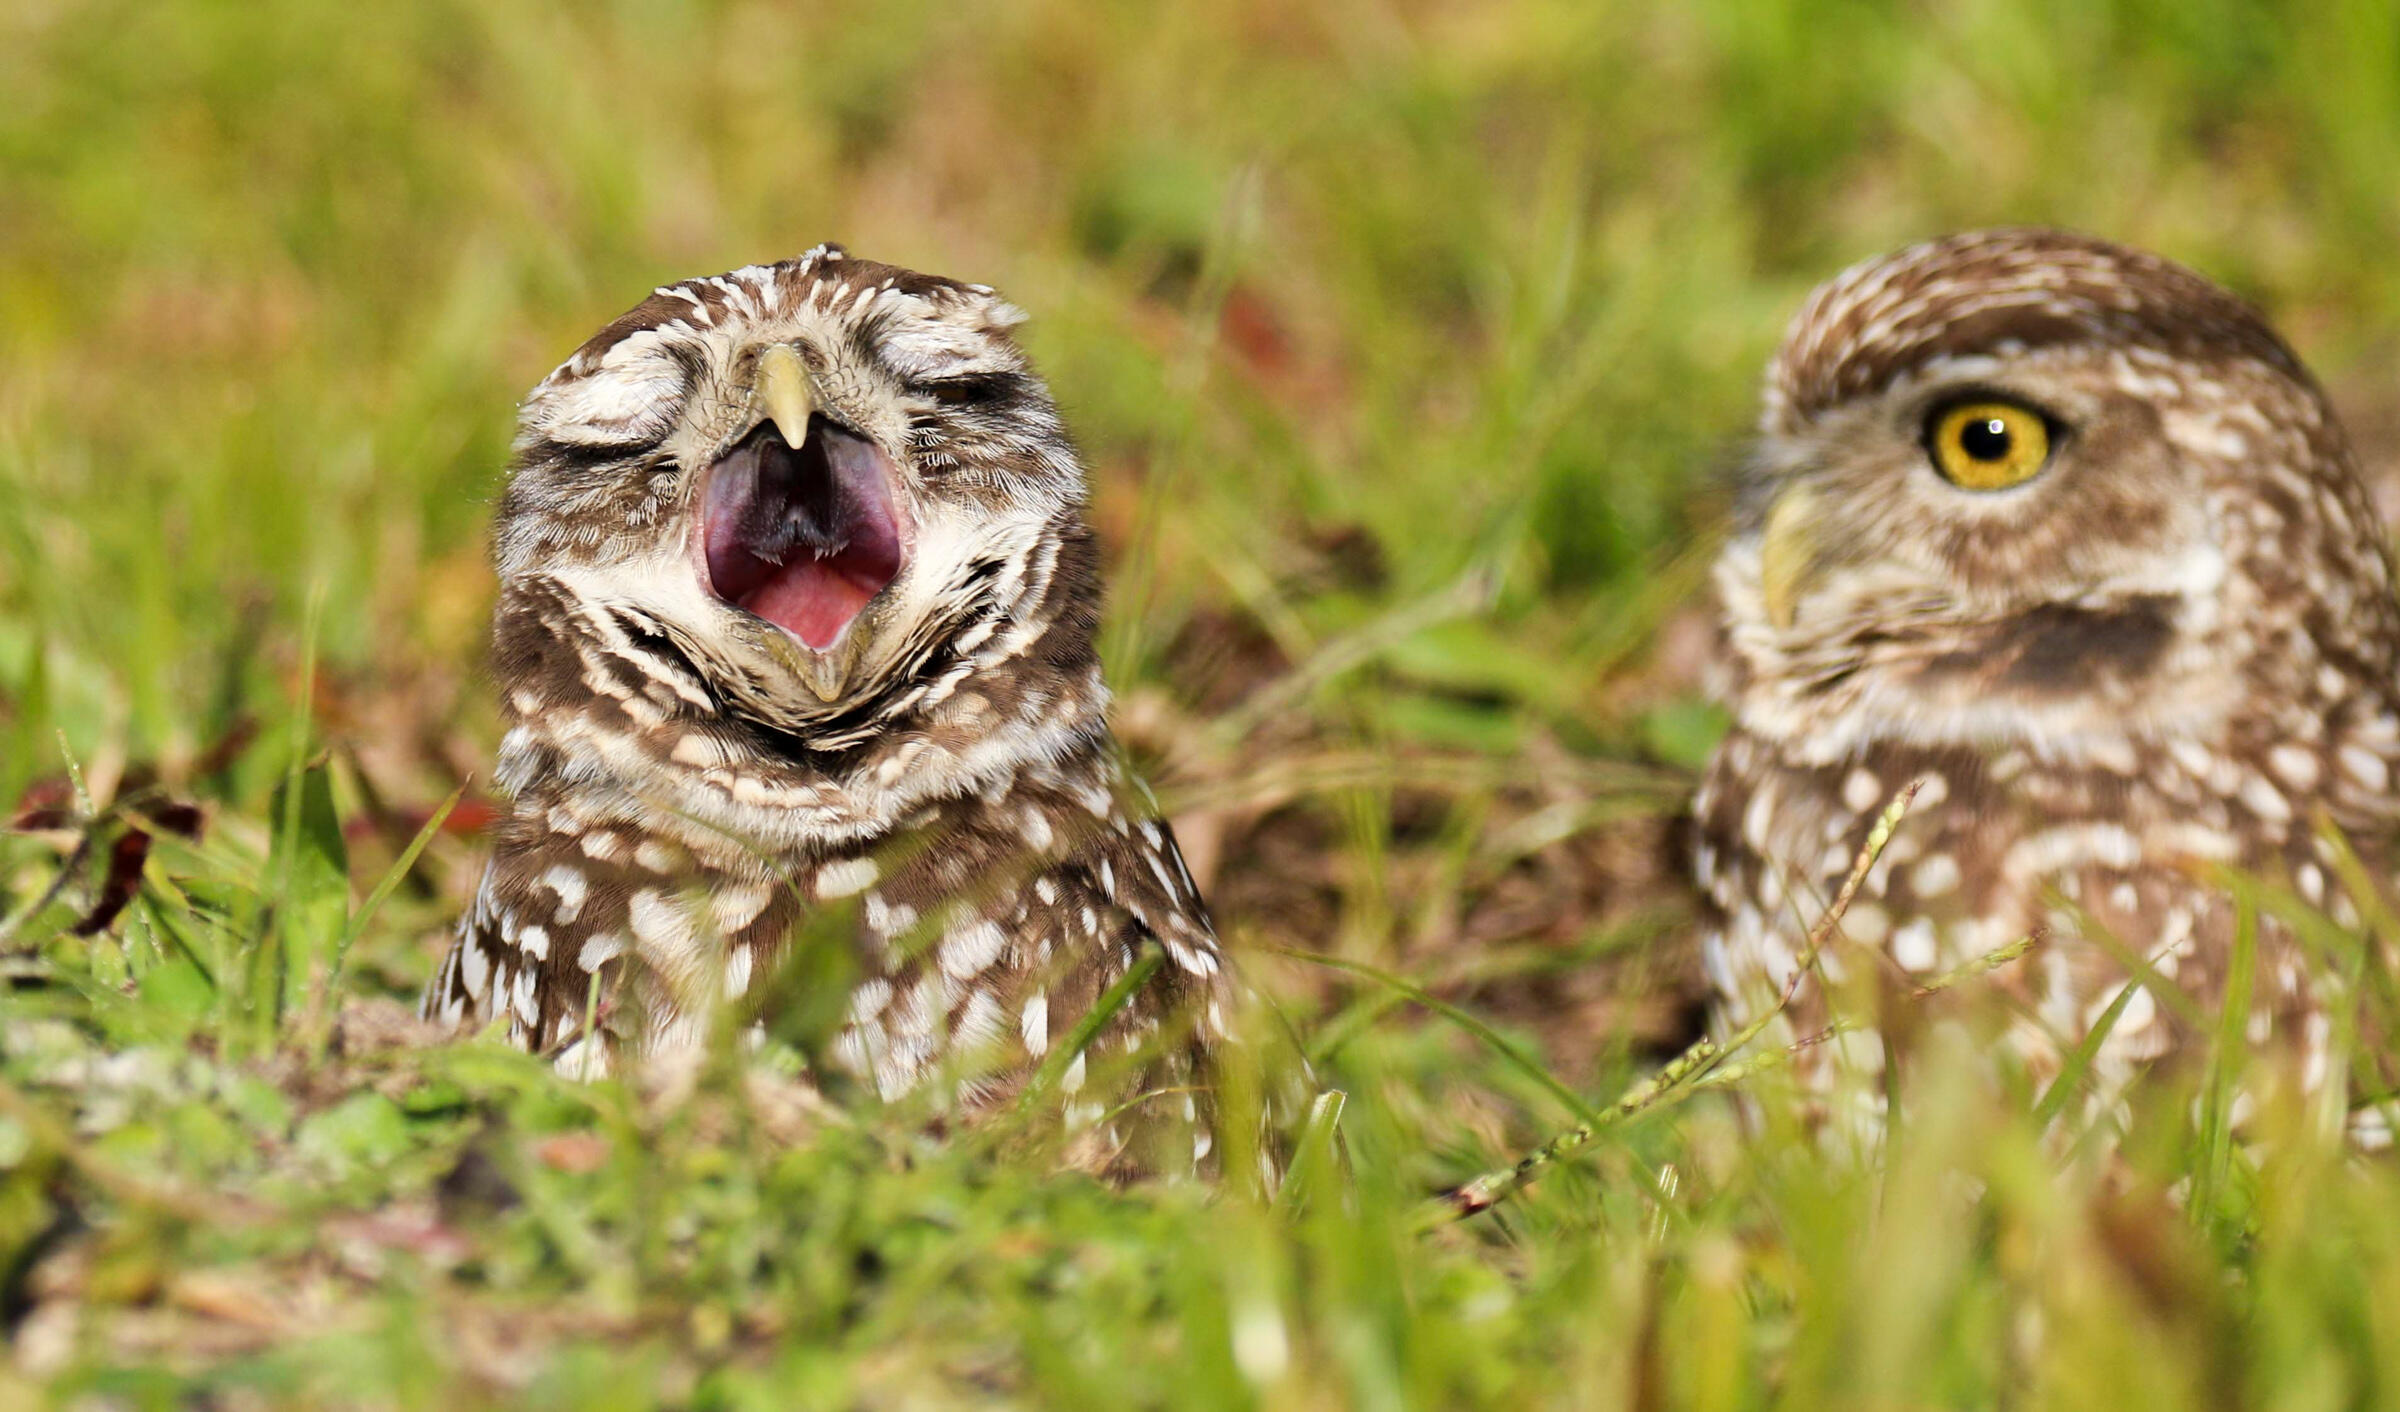 A Burrowing Owl, eyes squeezed shut, yawns as its more alert partner looks on, both peaking out from a grassy burrow.